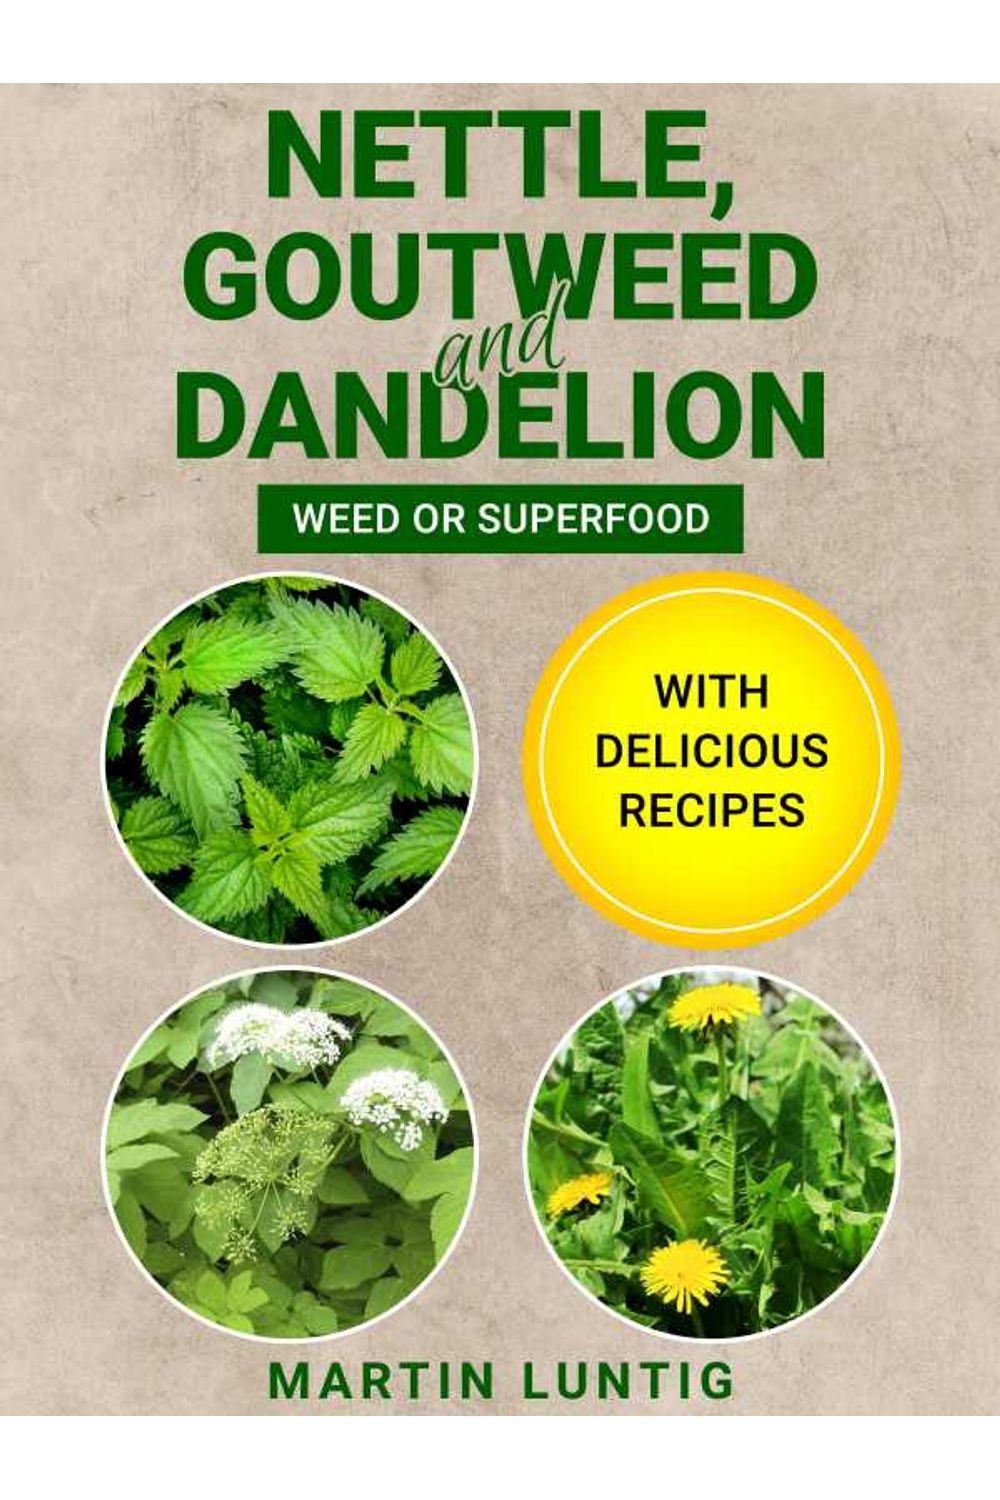 bw-nettle-goutweed-and-dandelion-travel-the-world-9783985949540